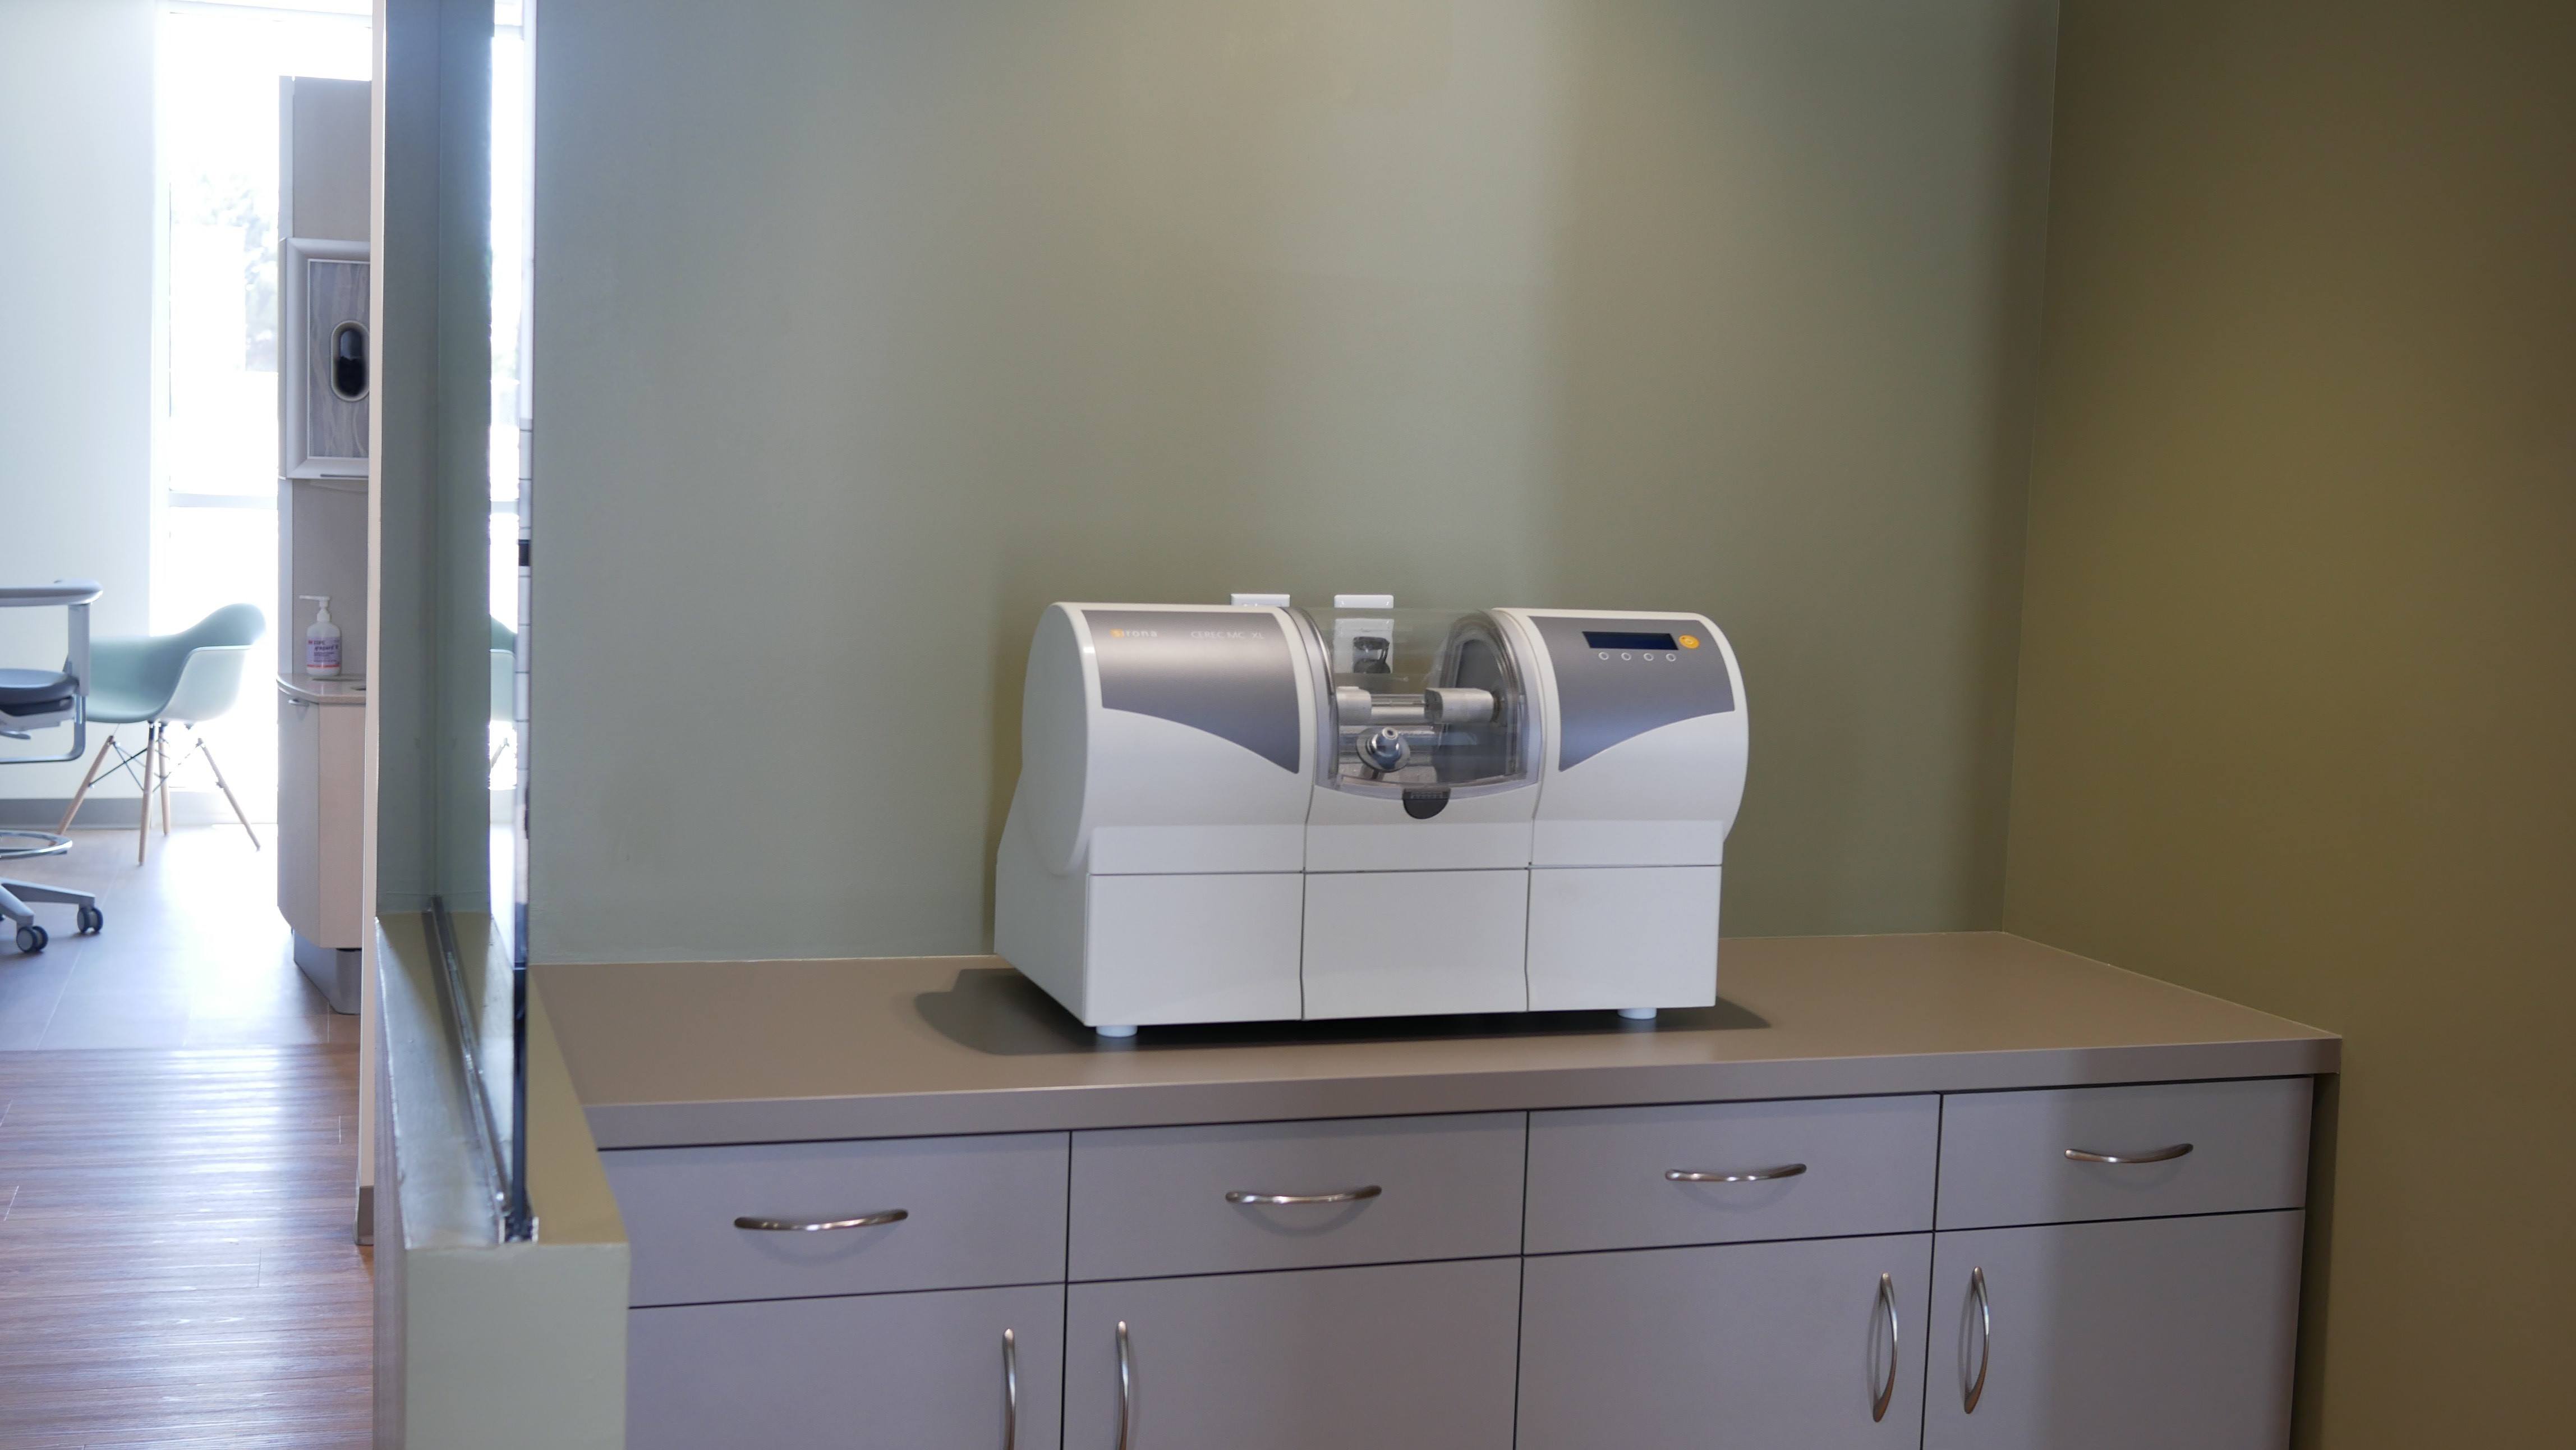 CEREC same day dentistry technology in dental lab and storage area